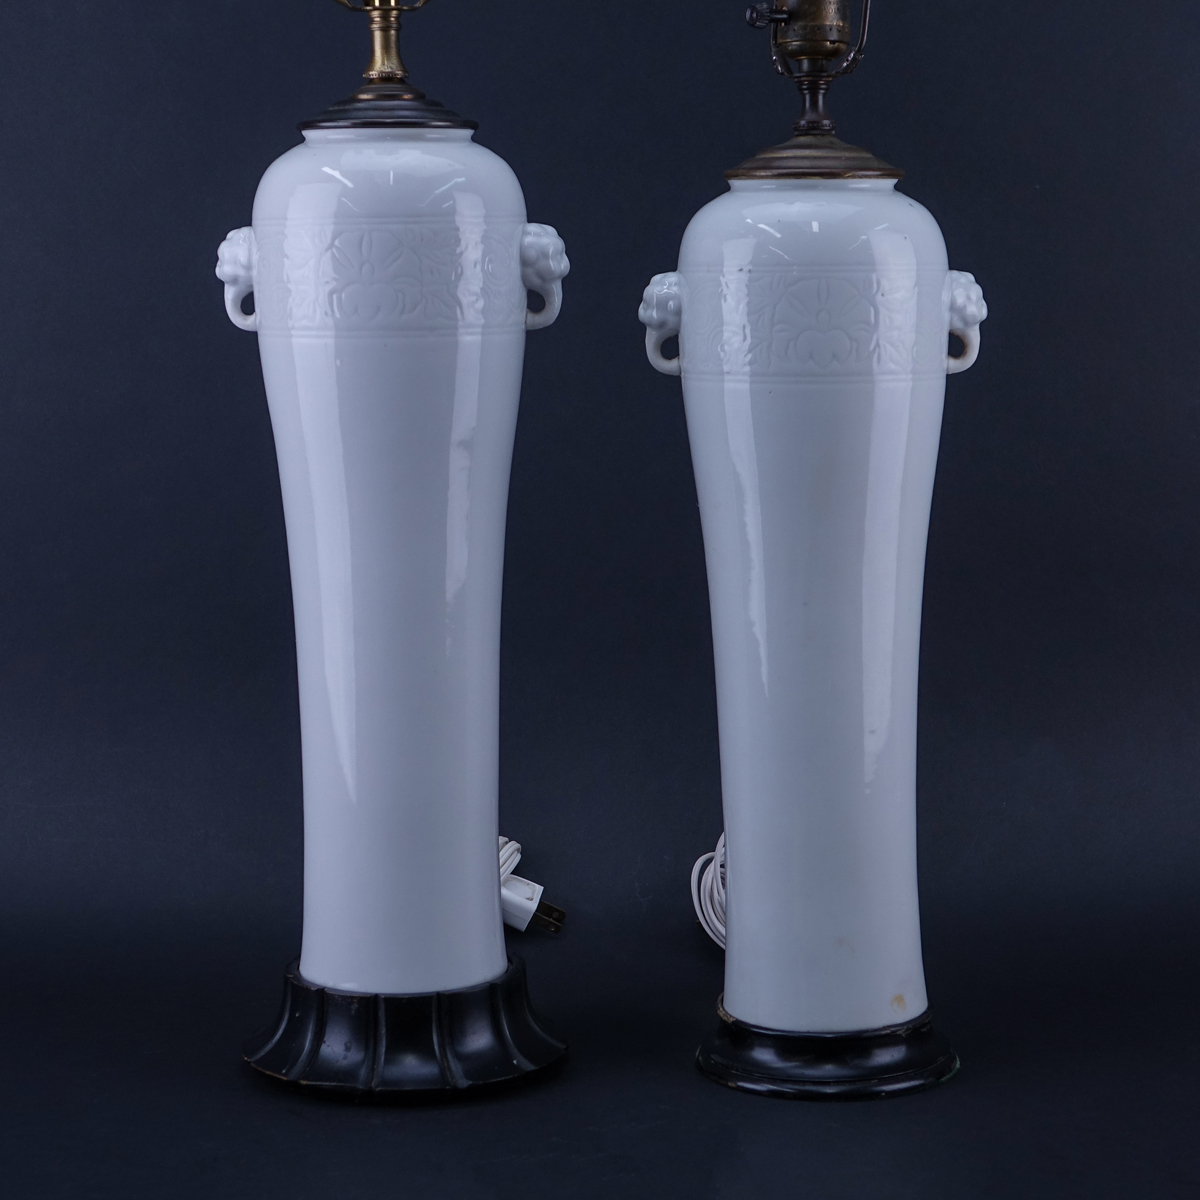 Pair of 20th Century Japanese Blanc de Chine Porcelain Lamps with Mock Handles. Good condition.